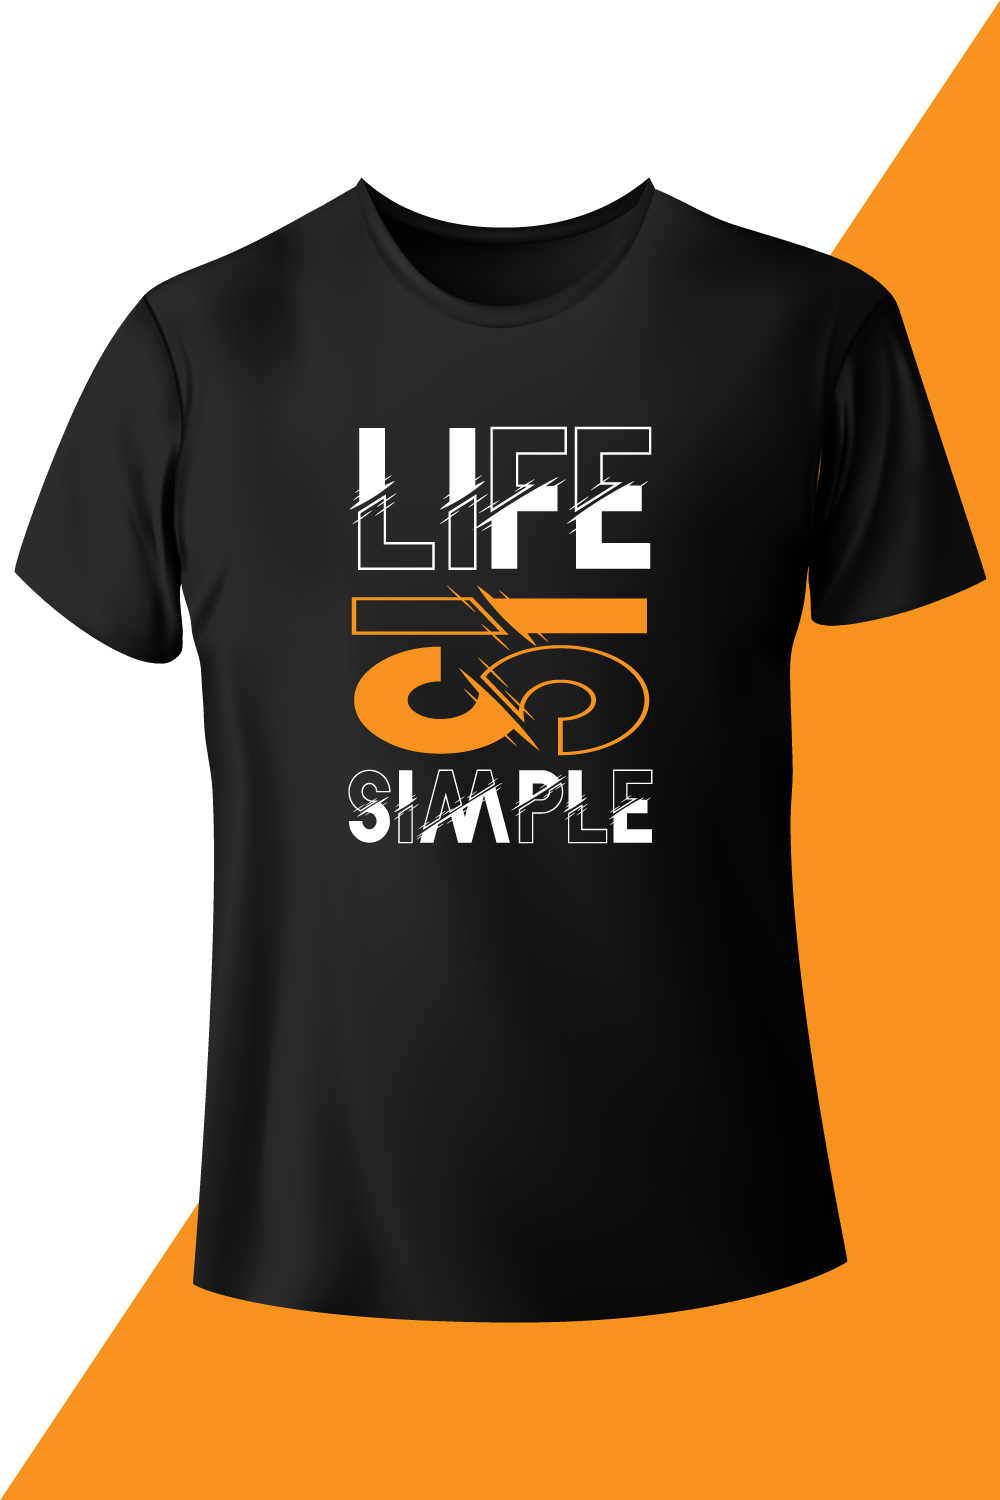 Image of a black t-shirt with an elegant inscription Life Is Simple.